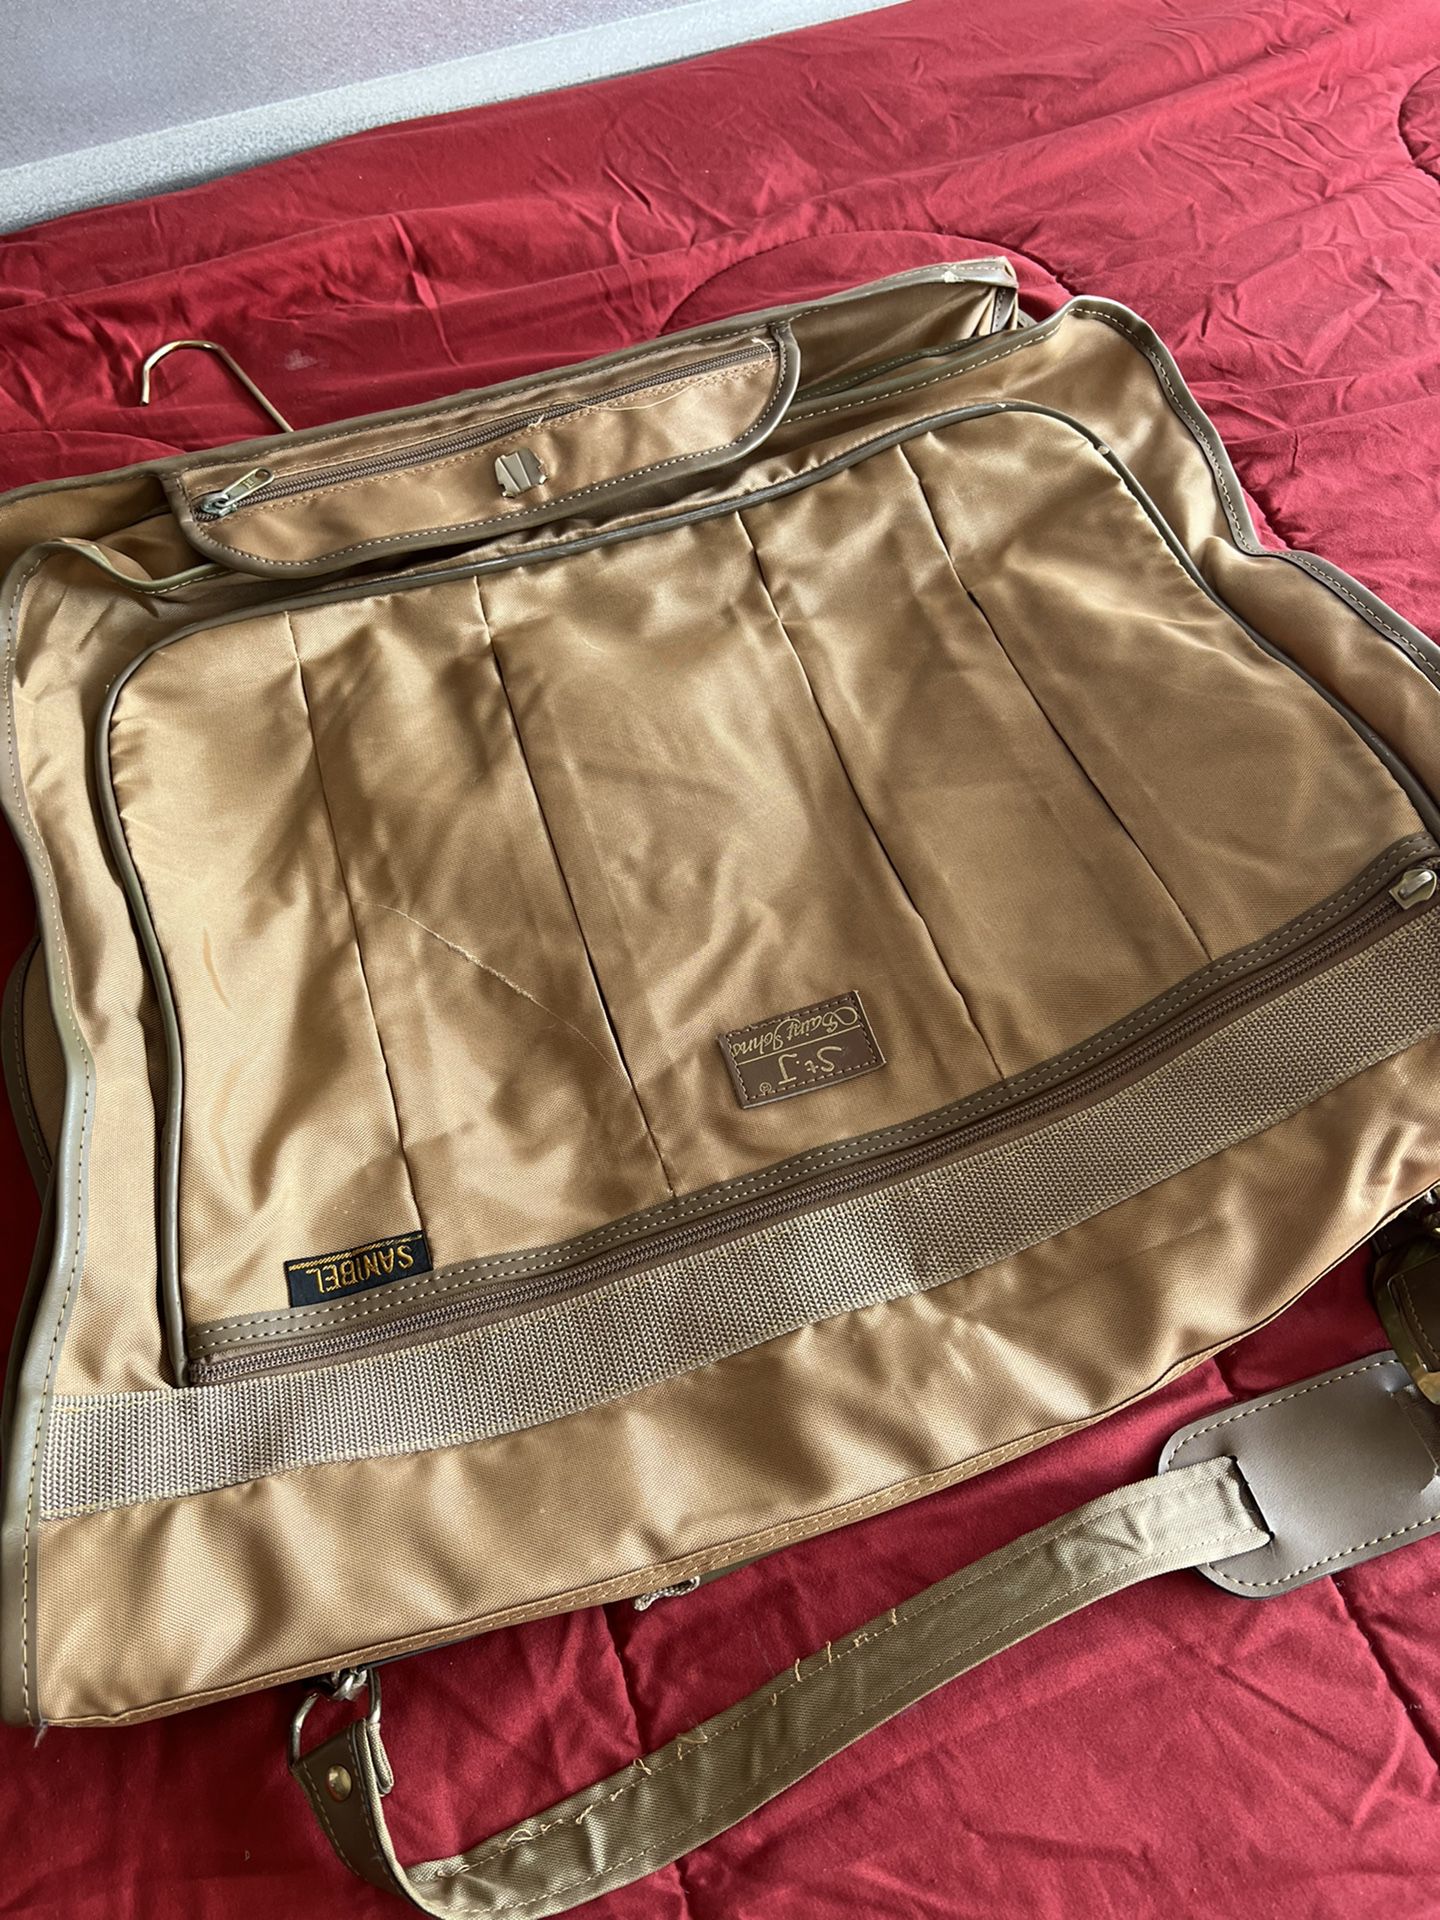 Garment Bag And Suitcase 